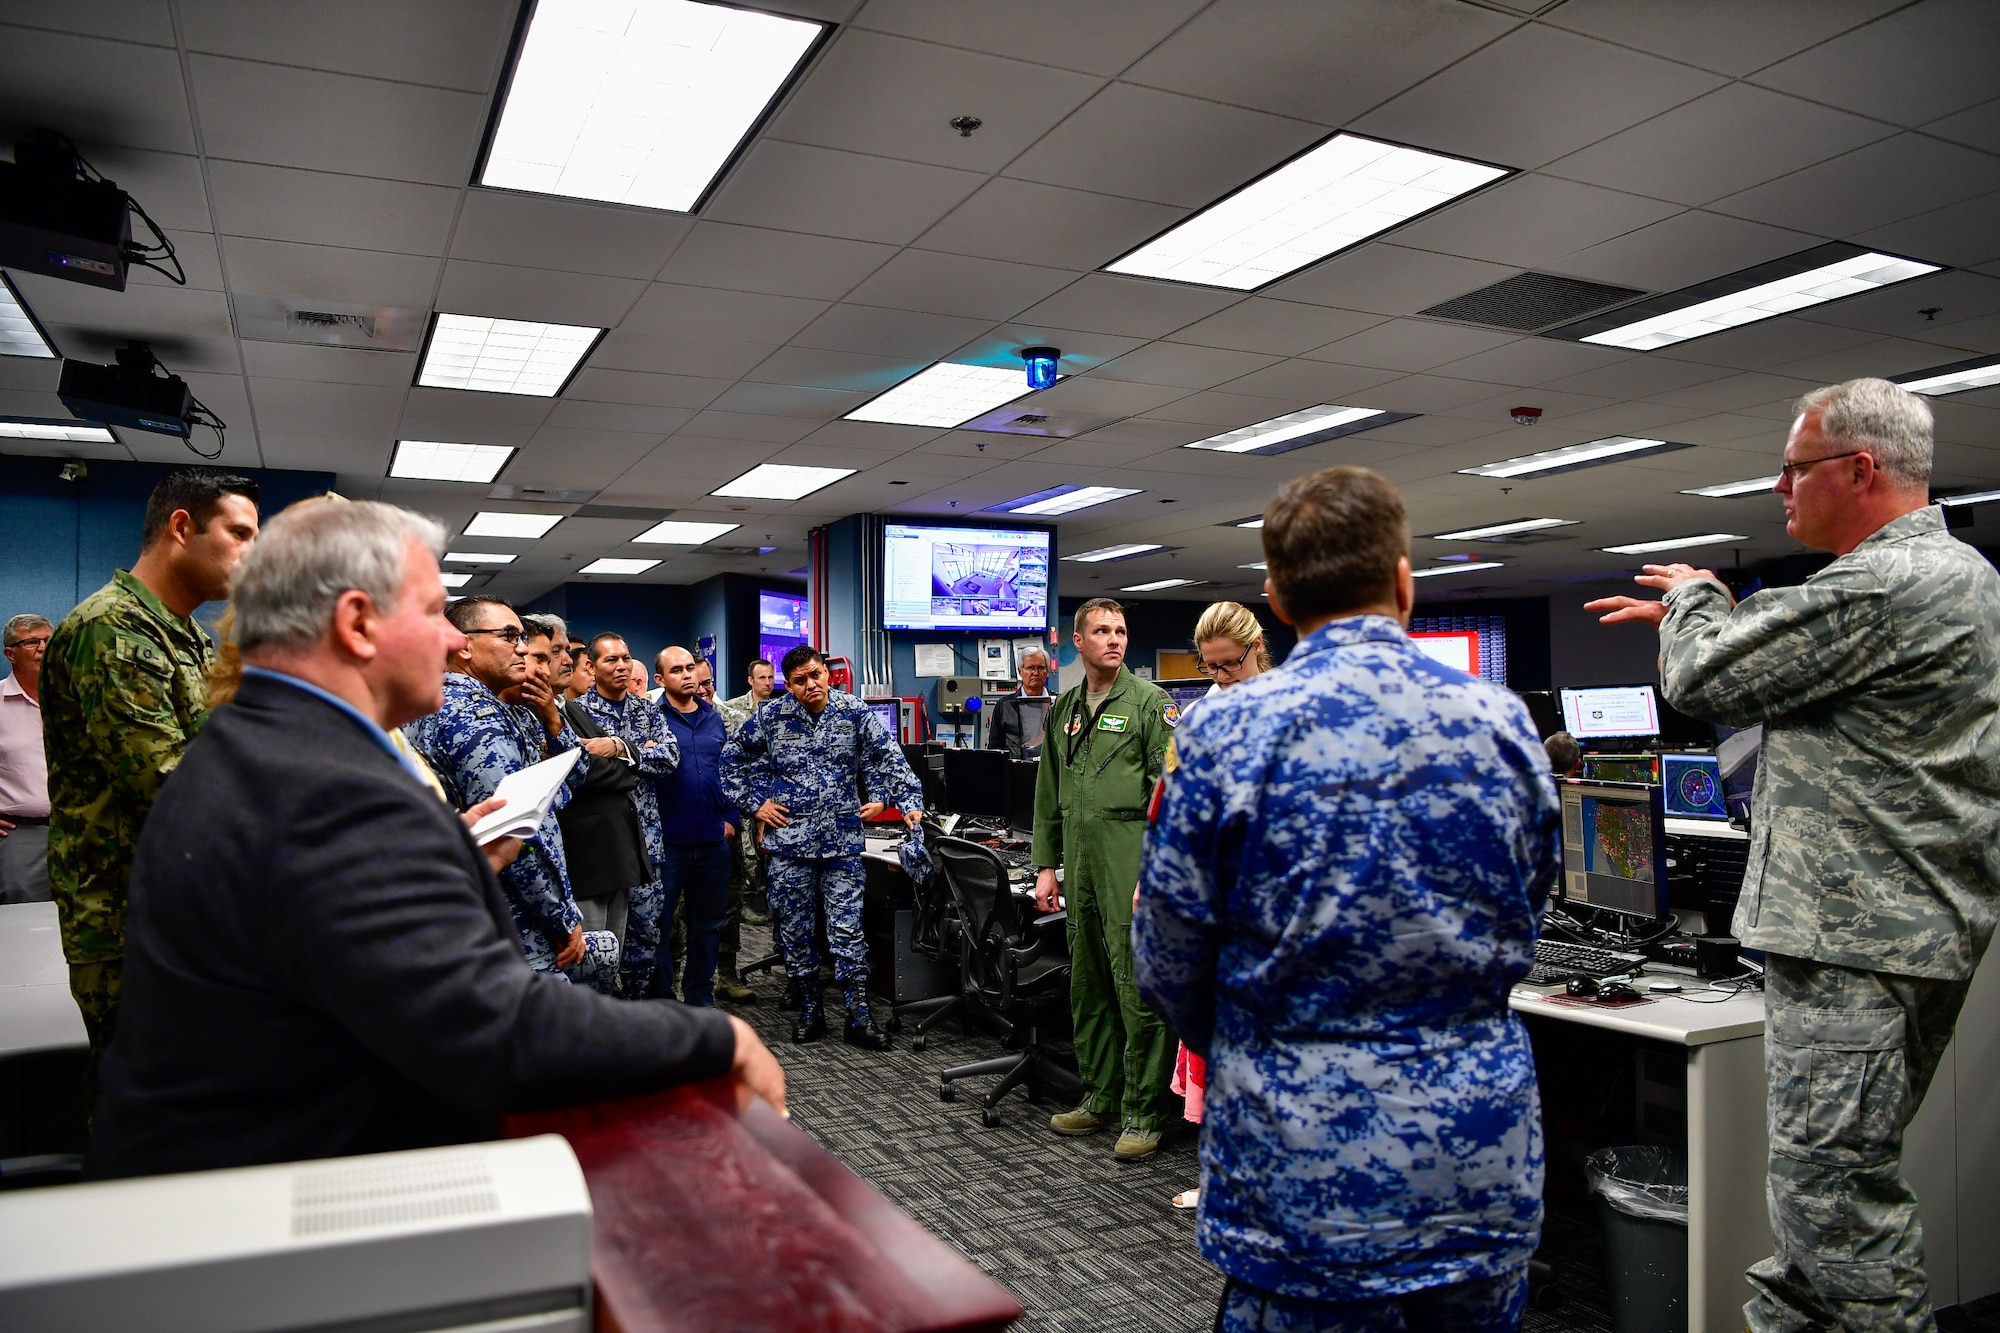 AMALGAM EAGLE 18 exercise planners tour the Western Air Defense Sector operations floor May 22, 2018. Col. William Krueger (far right), 225th Air Defense Group commander, answers questions from the group.  AMALGAM EAGLE 18 is a tactical exercise which is designed to enhance mutual warning and information sharing procedures in support of a cooperative response to illicit flights that cross the U.S.-Mexico border.